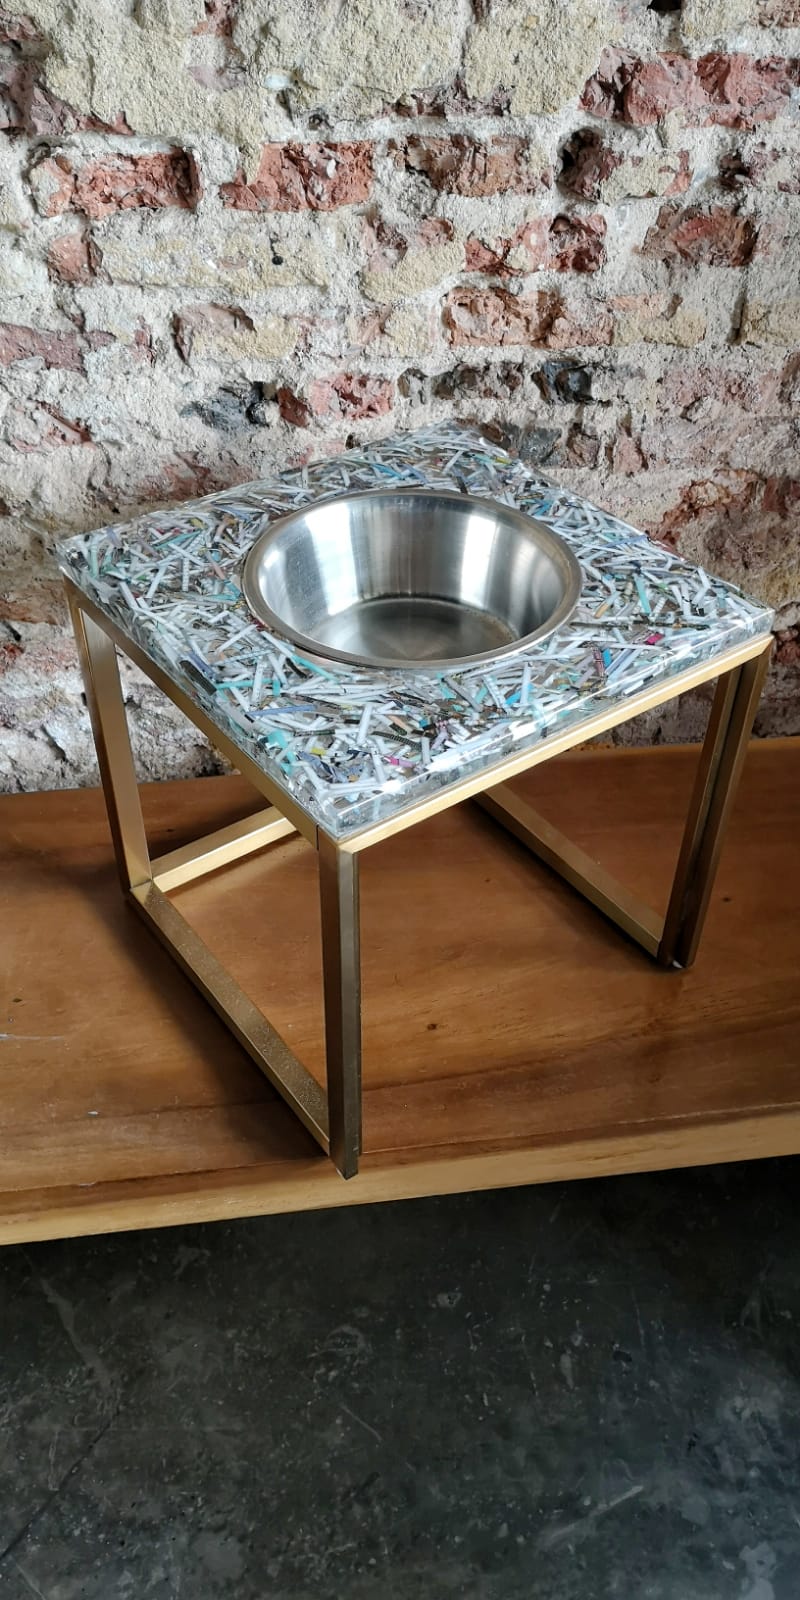 Greenland Golden Bowl Stand (Stainless Steel Bowl included)